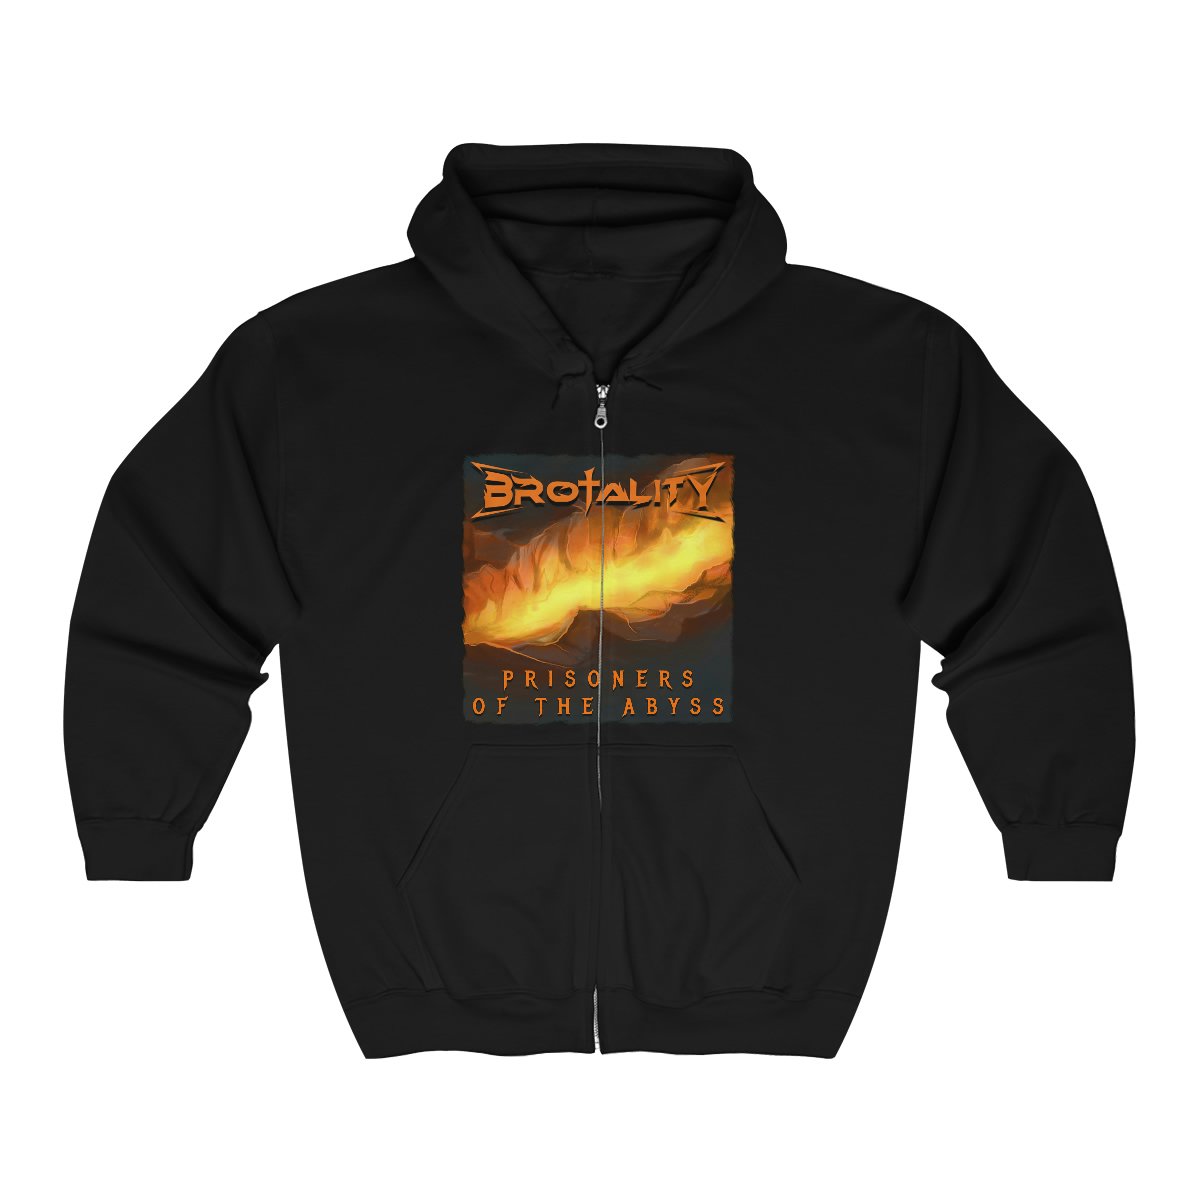 Brotality – Prisoners of the Abyss Full Zip Hooded Sweatshirt